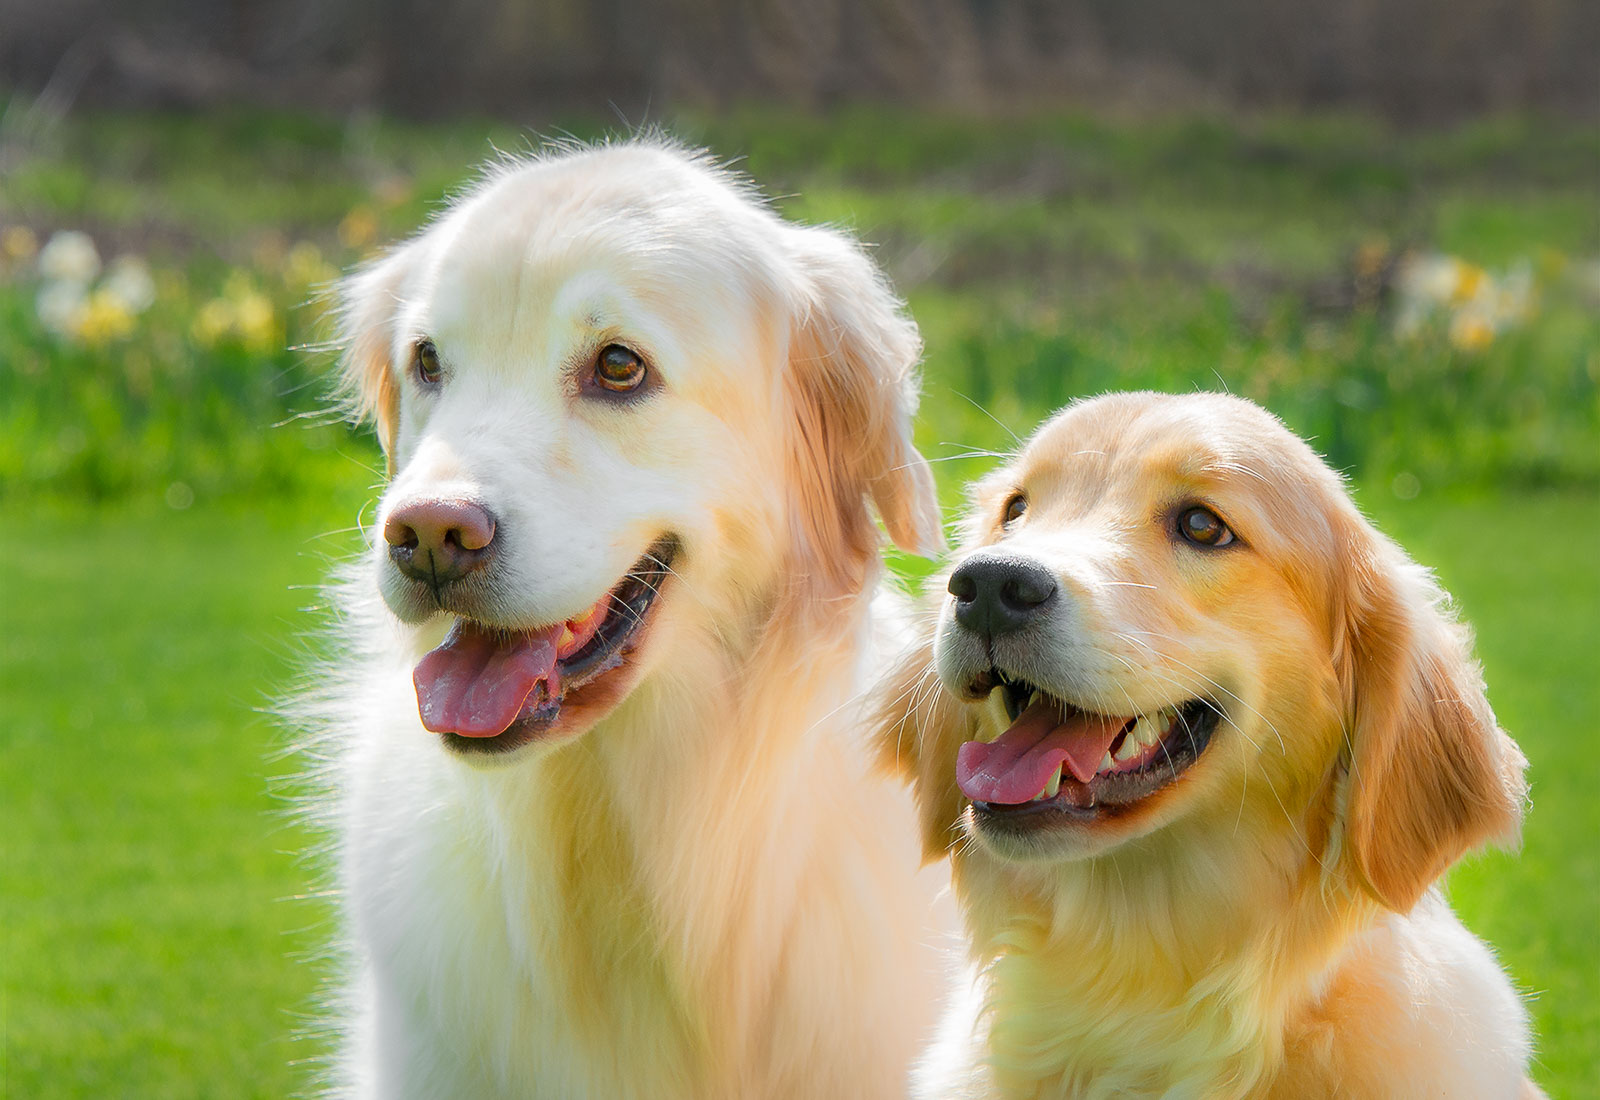 Two Golden Retrievers smiling on a spring day